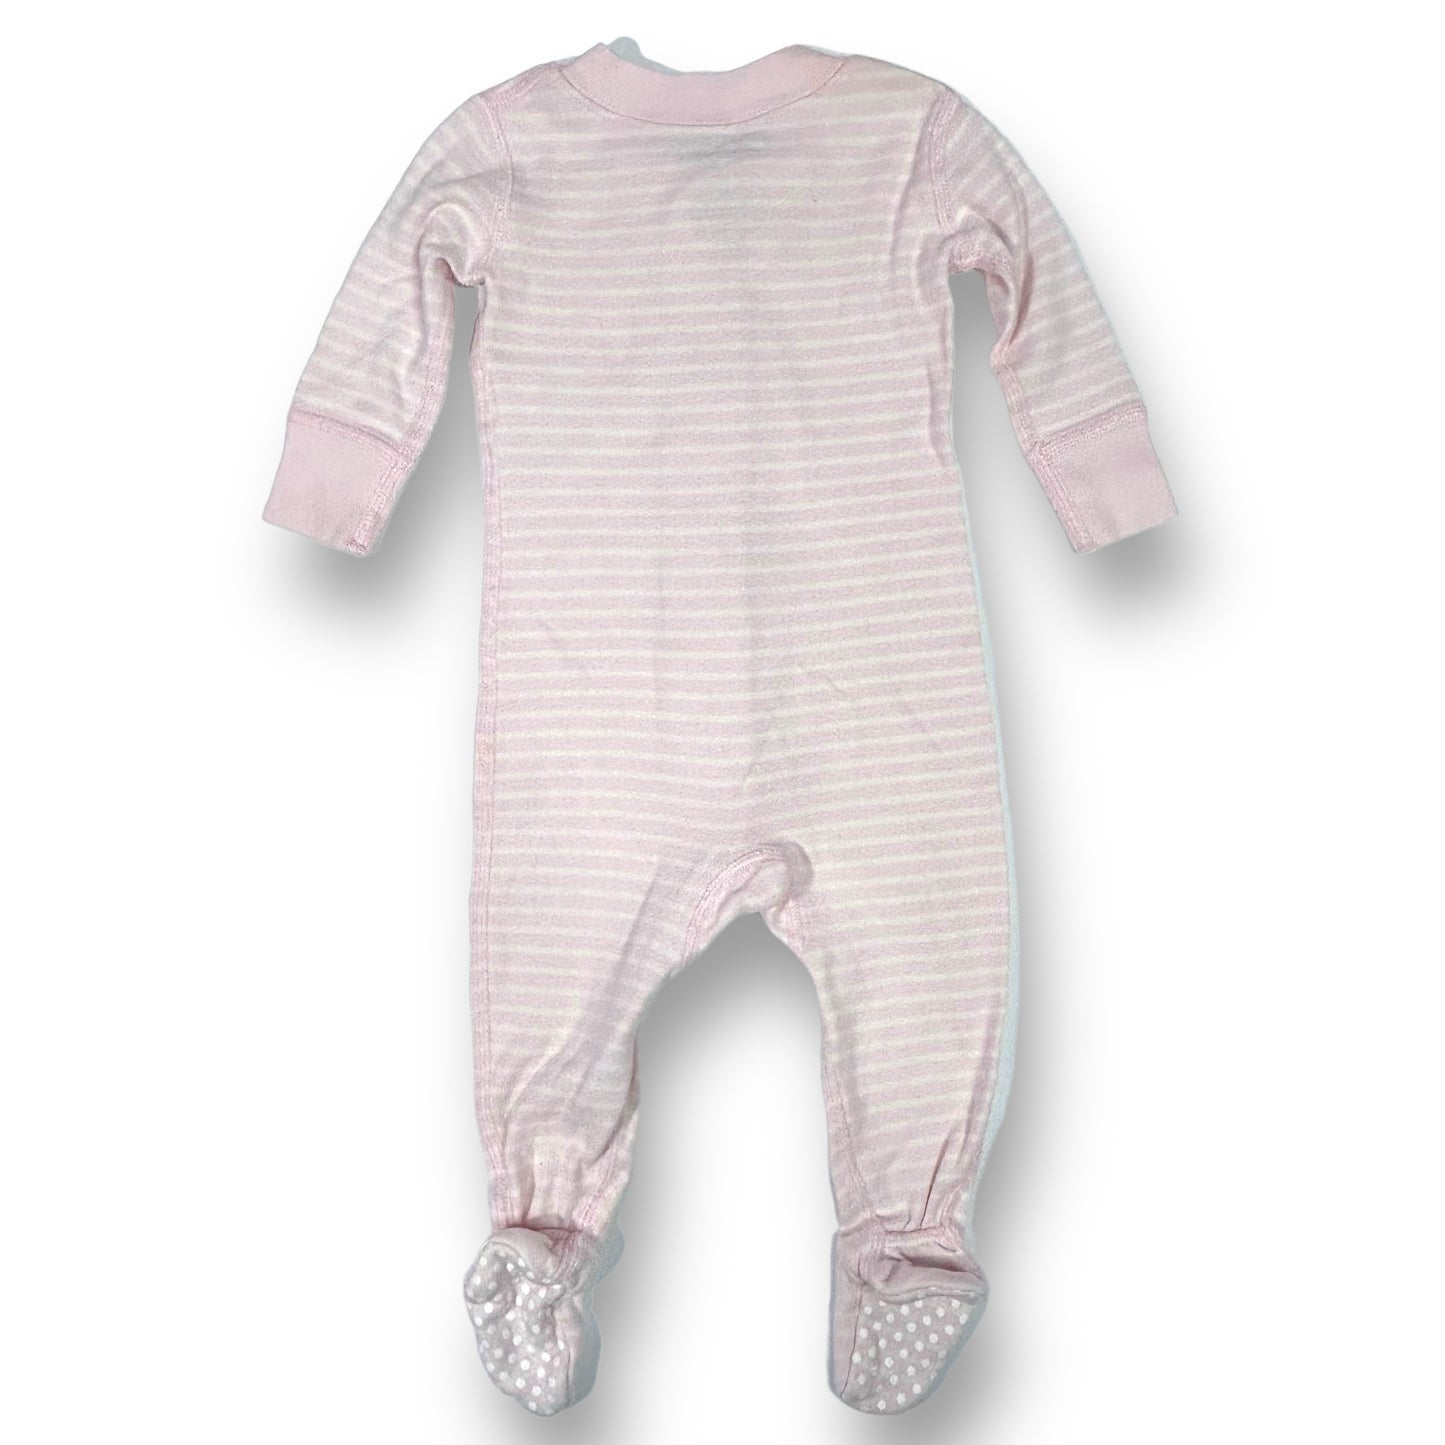 Girls Moon and Back by Hanna Andersson Size 3-6 Months Pink Footie Sleeper